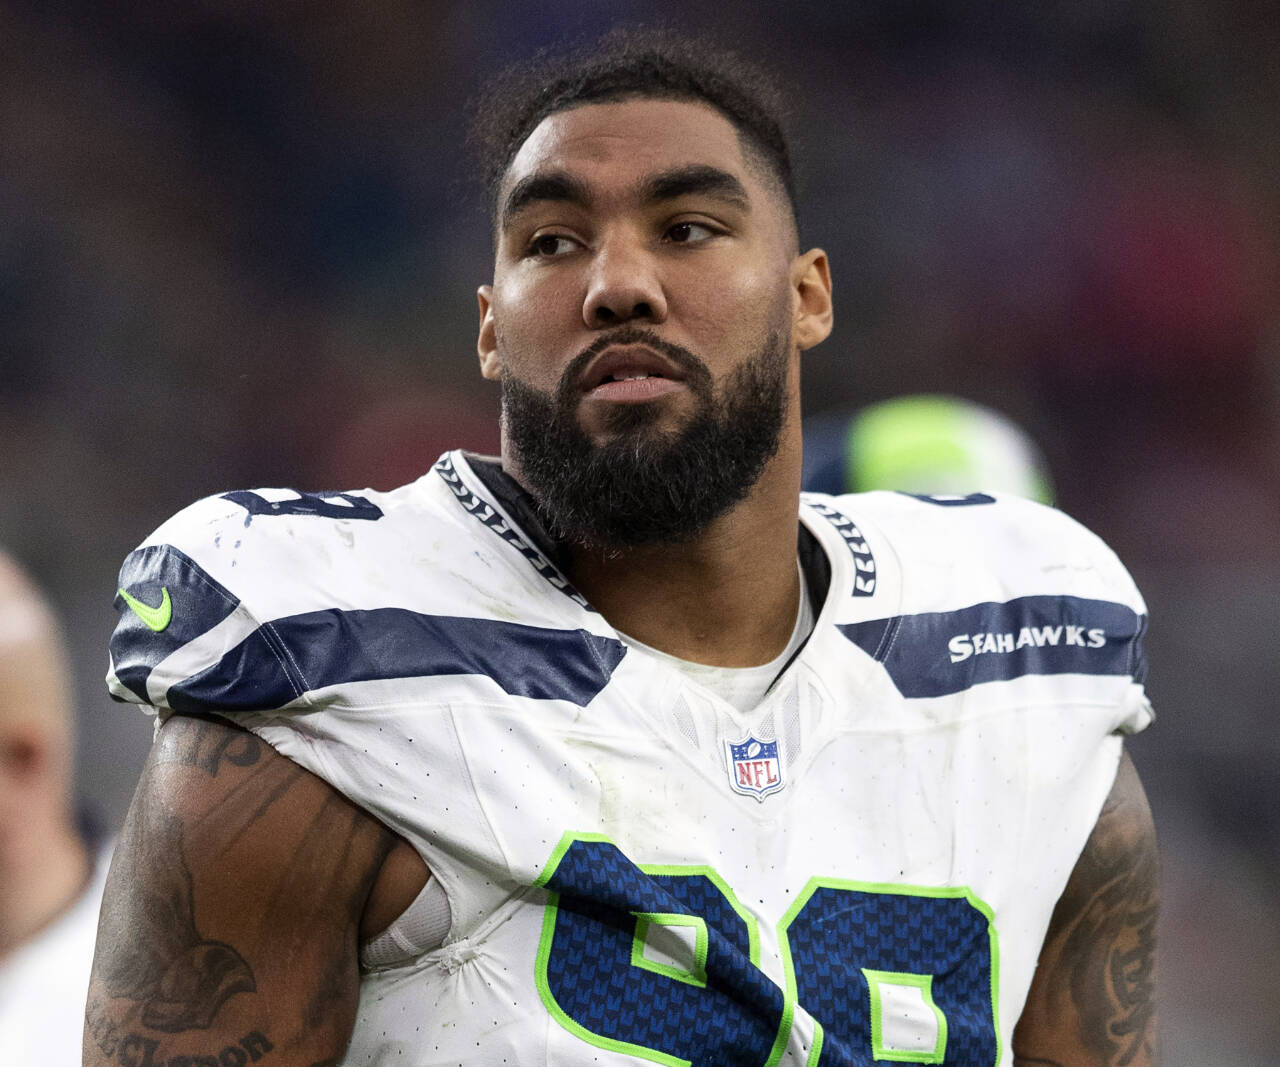 Seattle Seahawks’ Leonard Williams looks on during an NFL game Jan. 7 in Glendale, Ariz. The Seahawks agreed to terms with defensive lineman Williams and tight end Noah Fant, three people with knowledge of the deals said Monday. (AP Photo/Michael McGinnis, File)